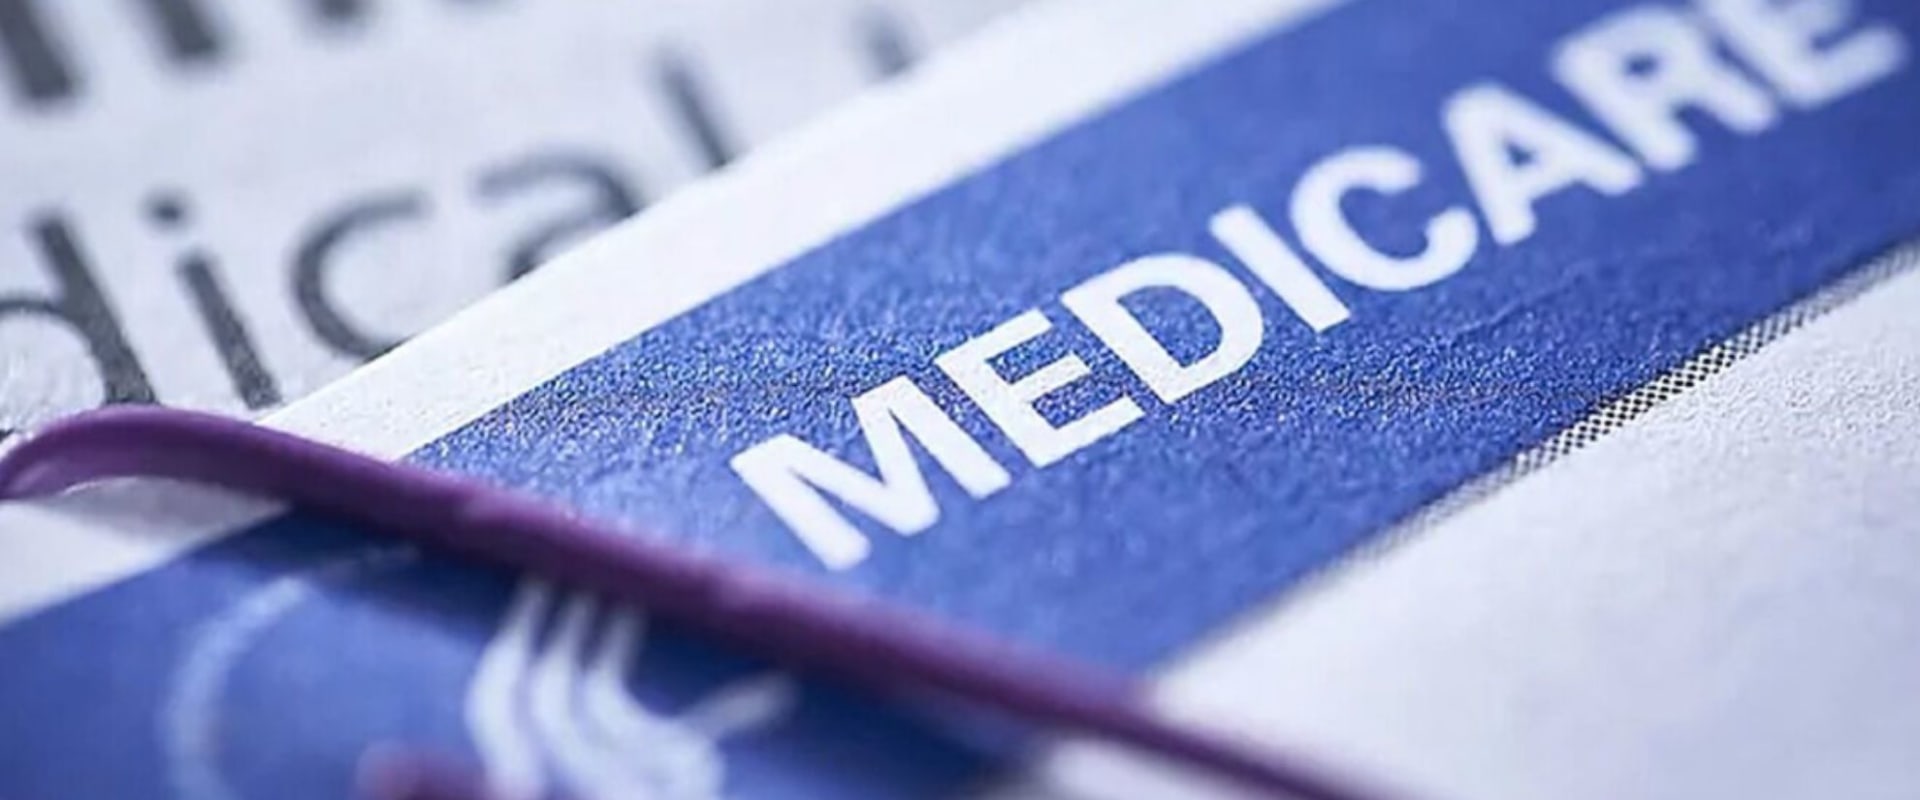 Medicare and Medicaid Coverage Explained